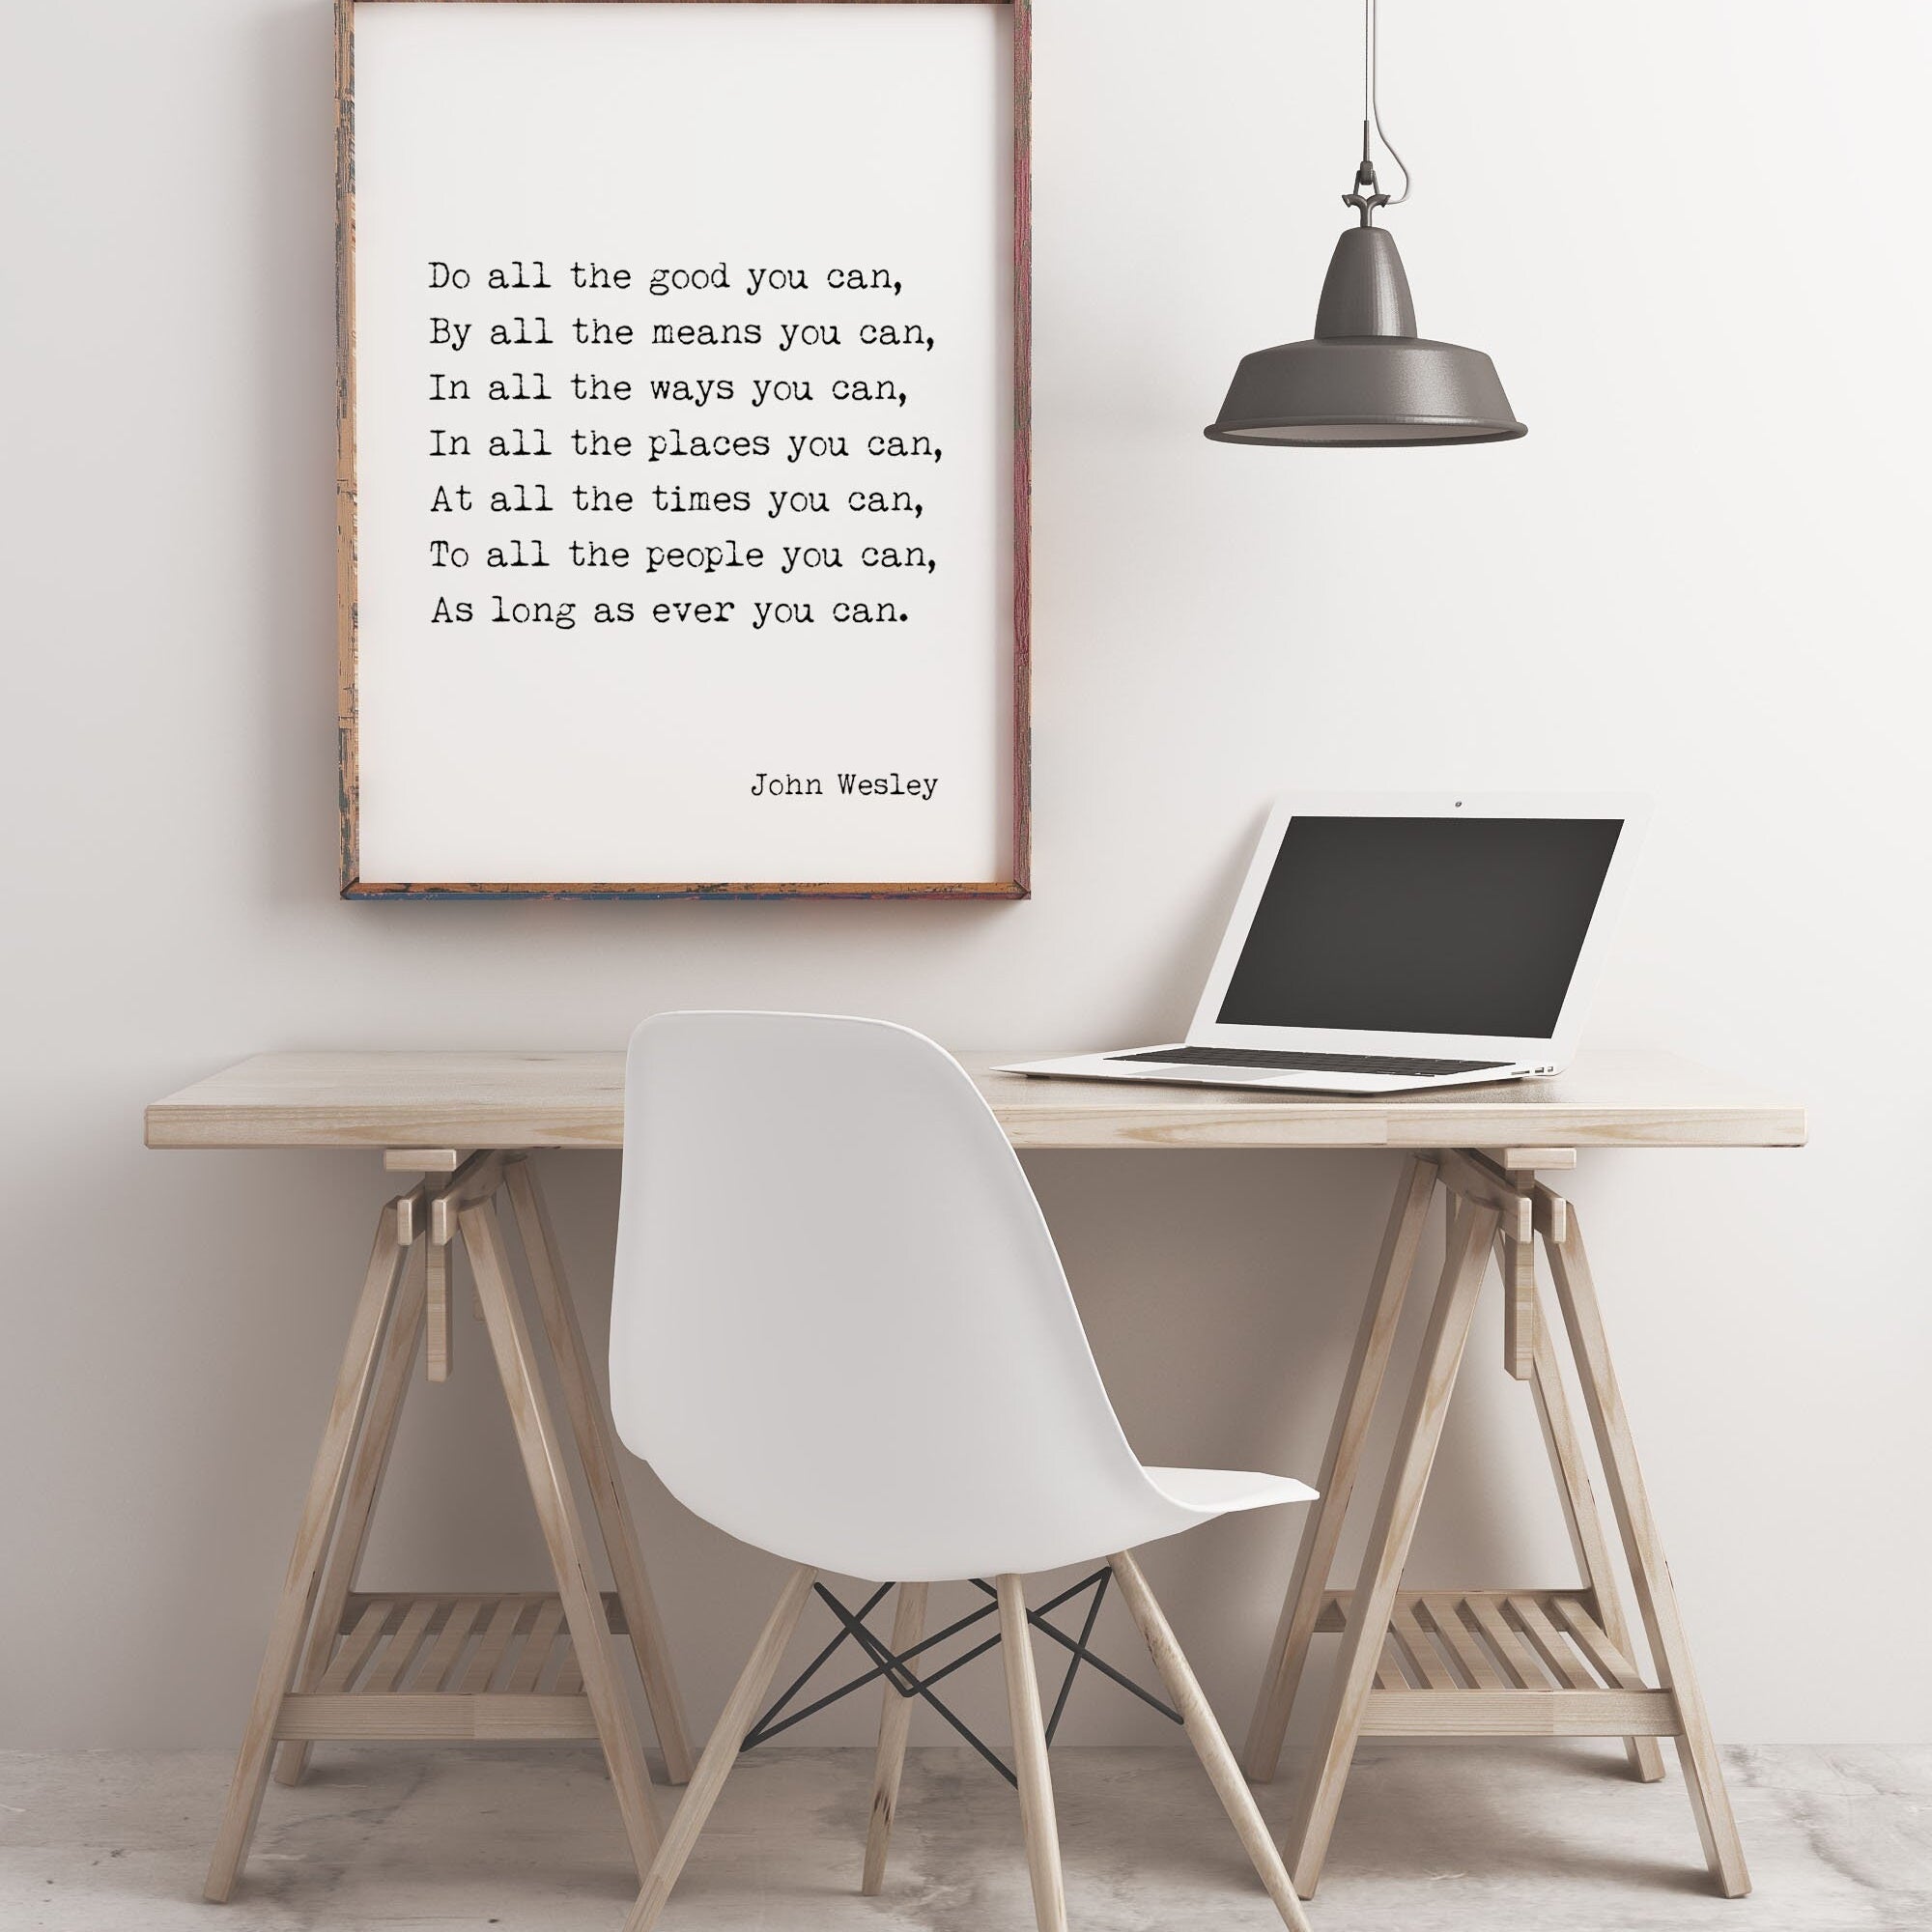 Do All The Good You Can Quote Print in Black & White, John Wesley Inspirational Quote Wall Art Print Unframed or Framed